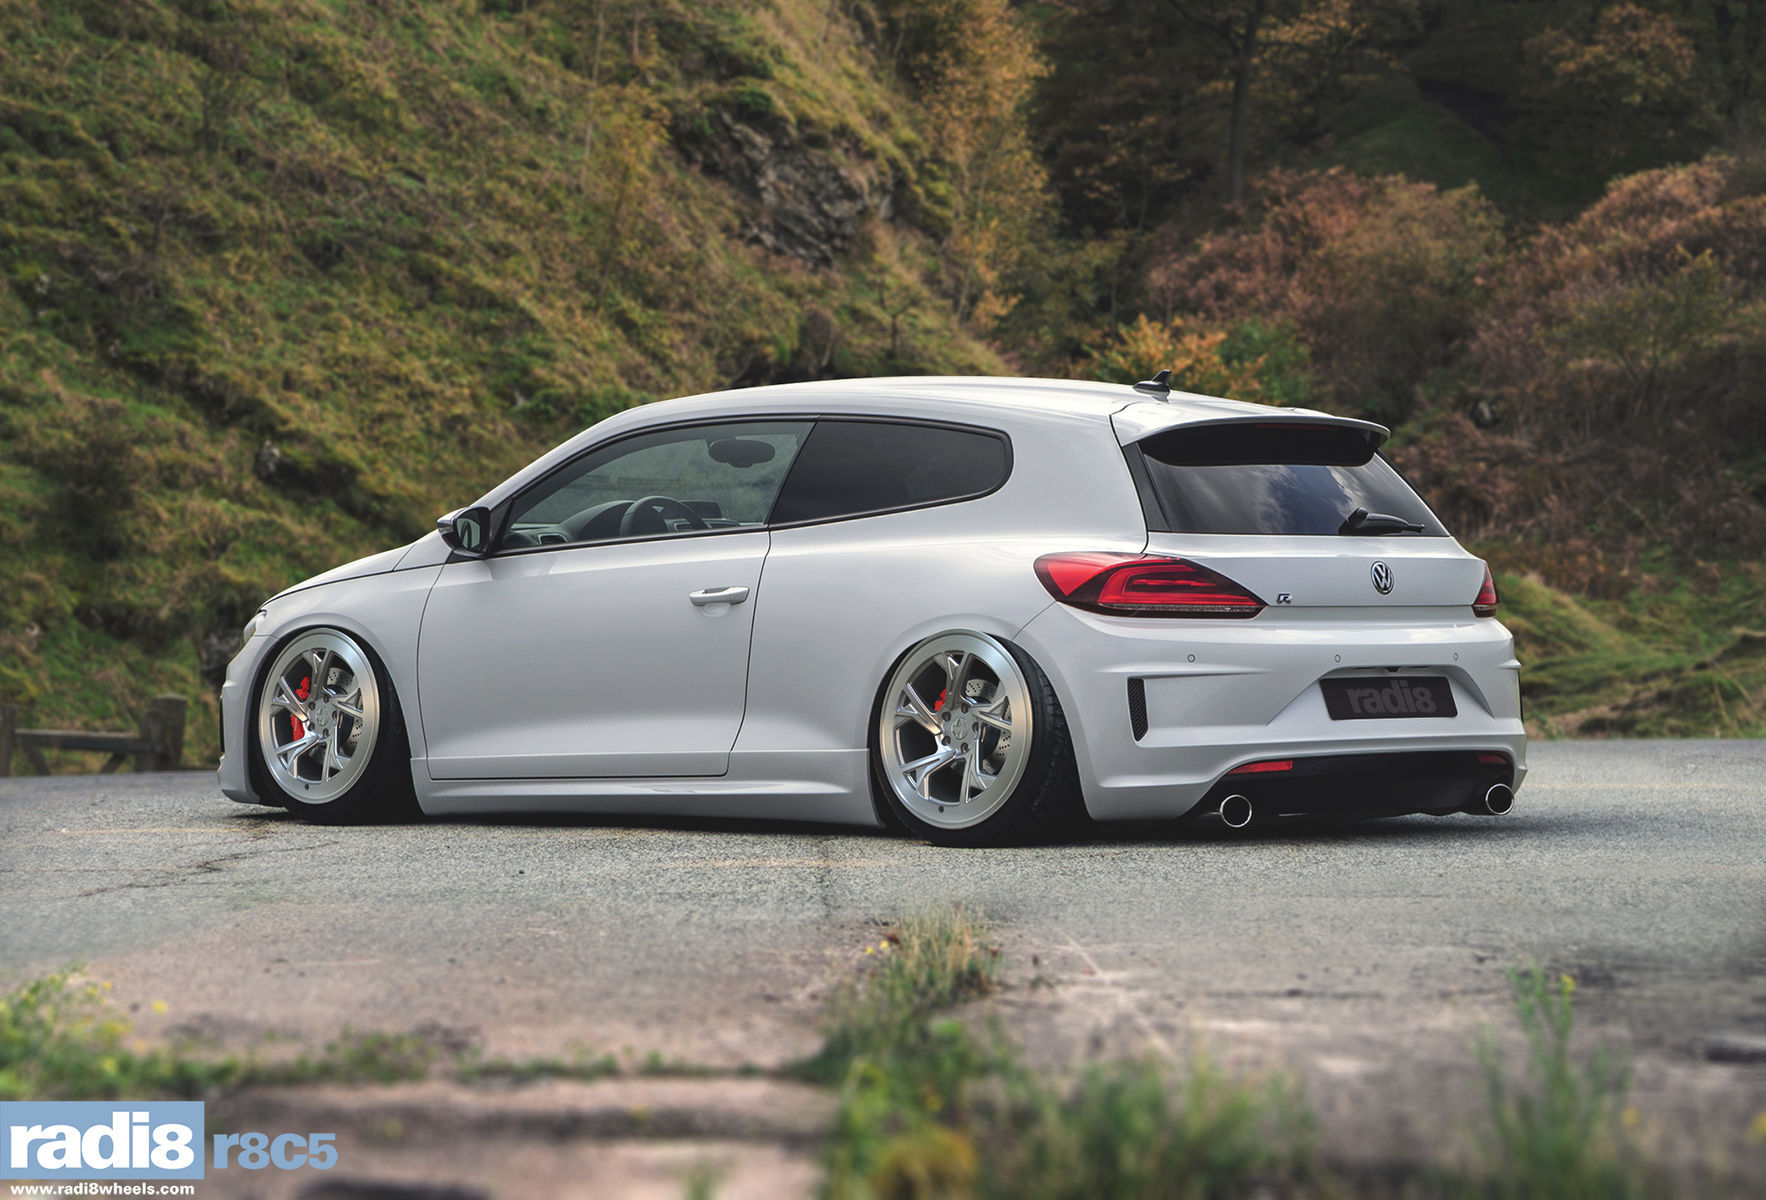 This image was parked by Radi8 Wheels to a garage called Radi8 R8C5 - Volks...